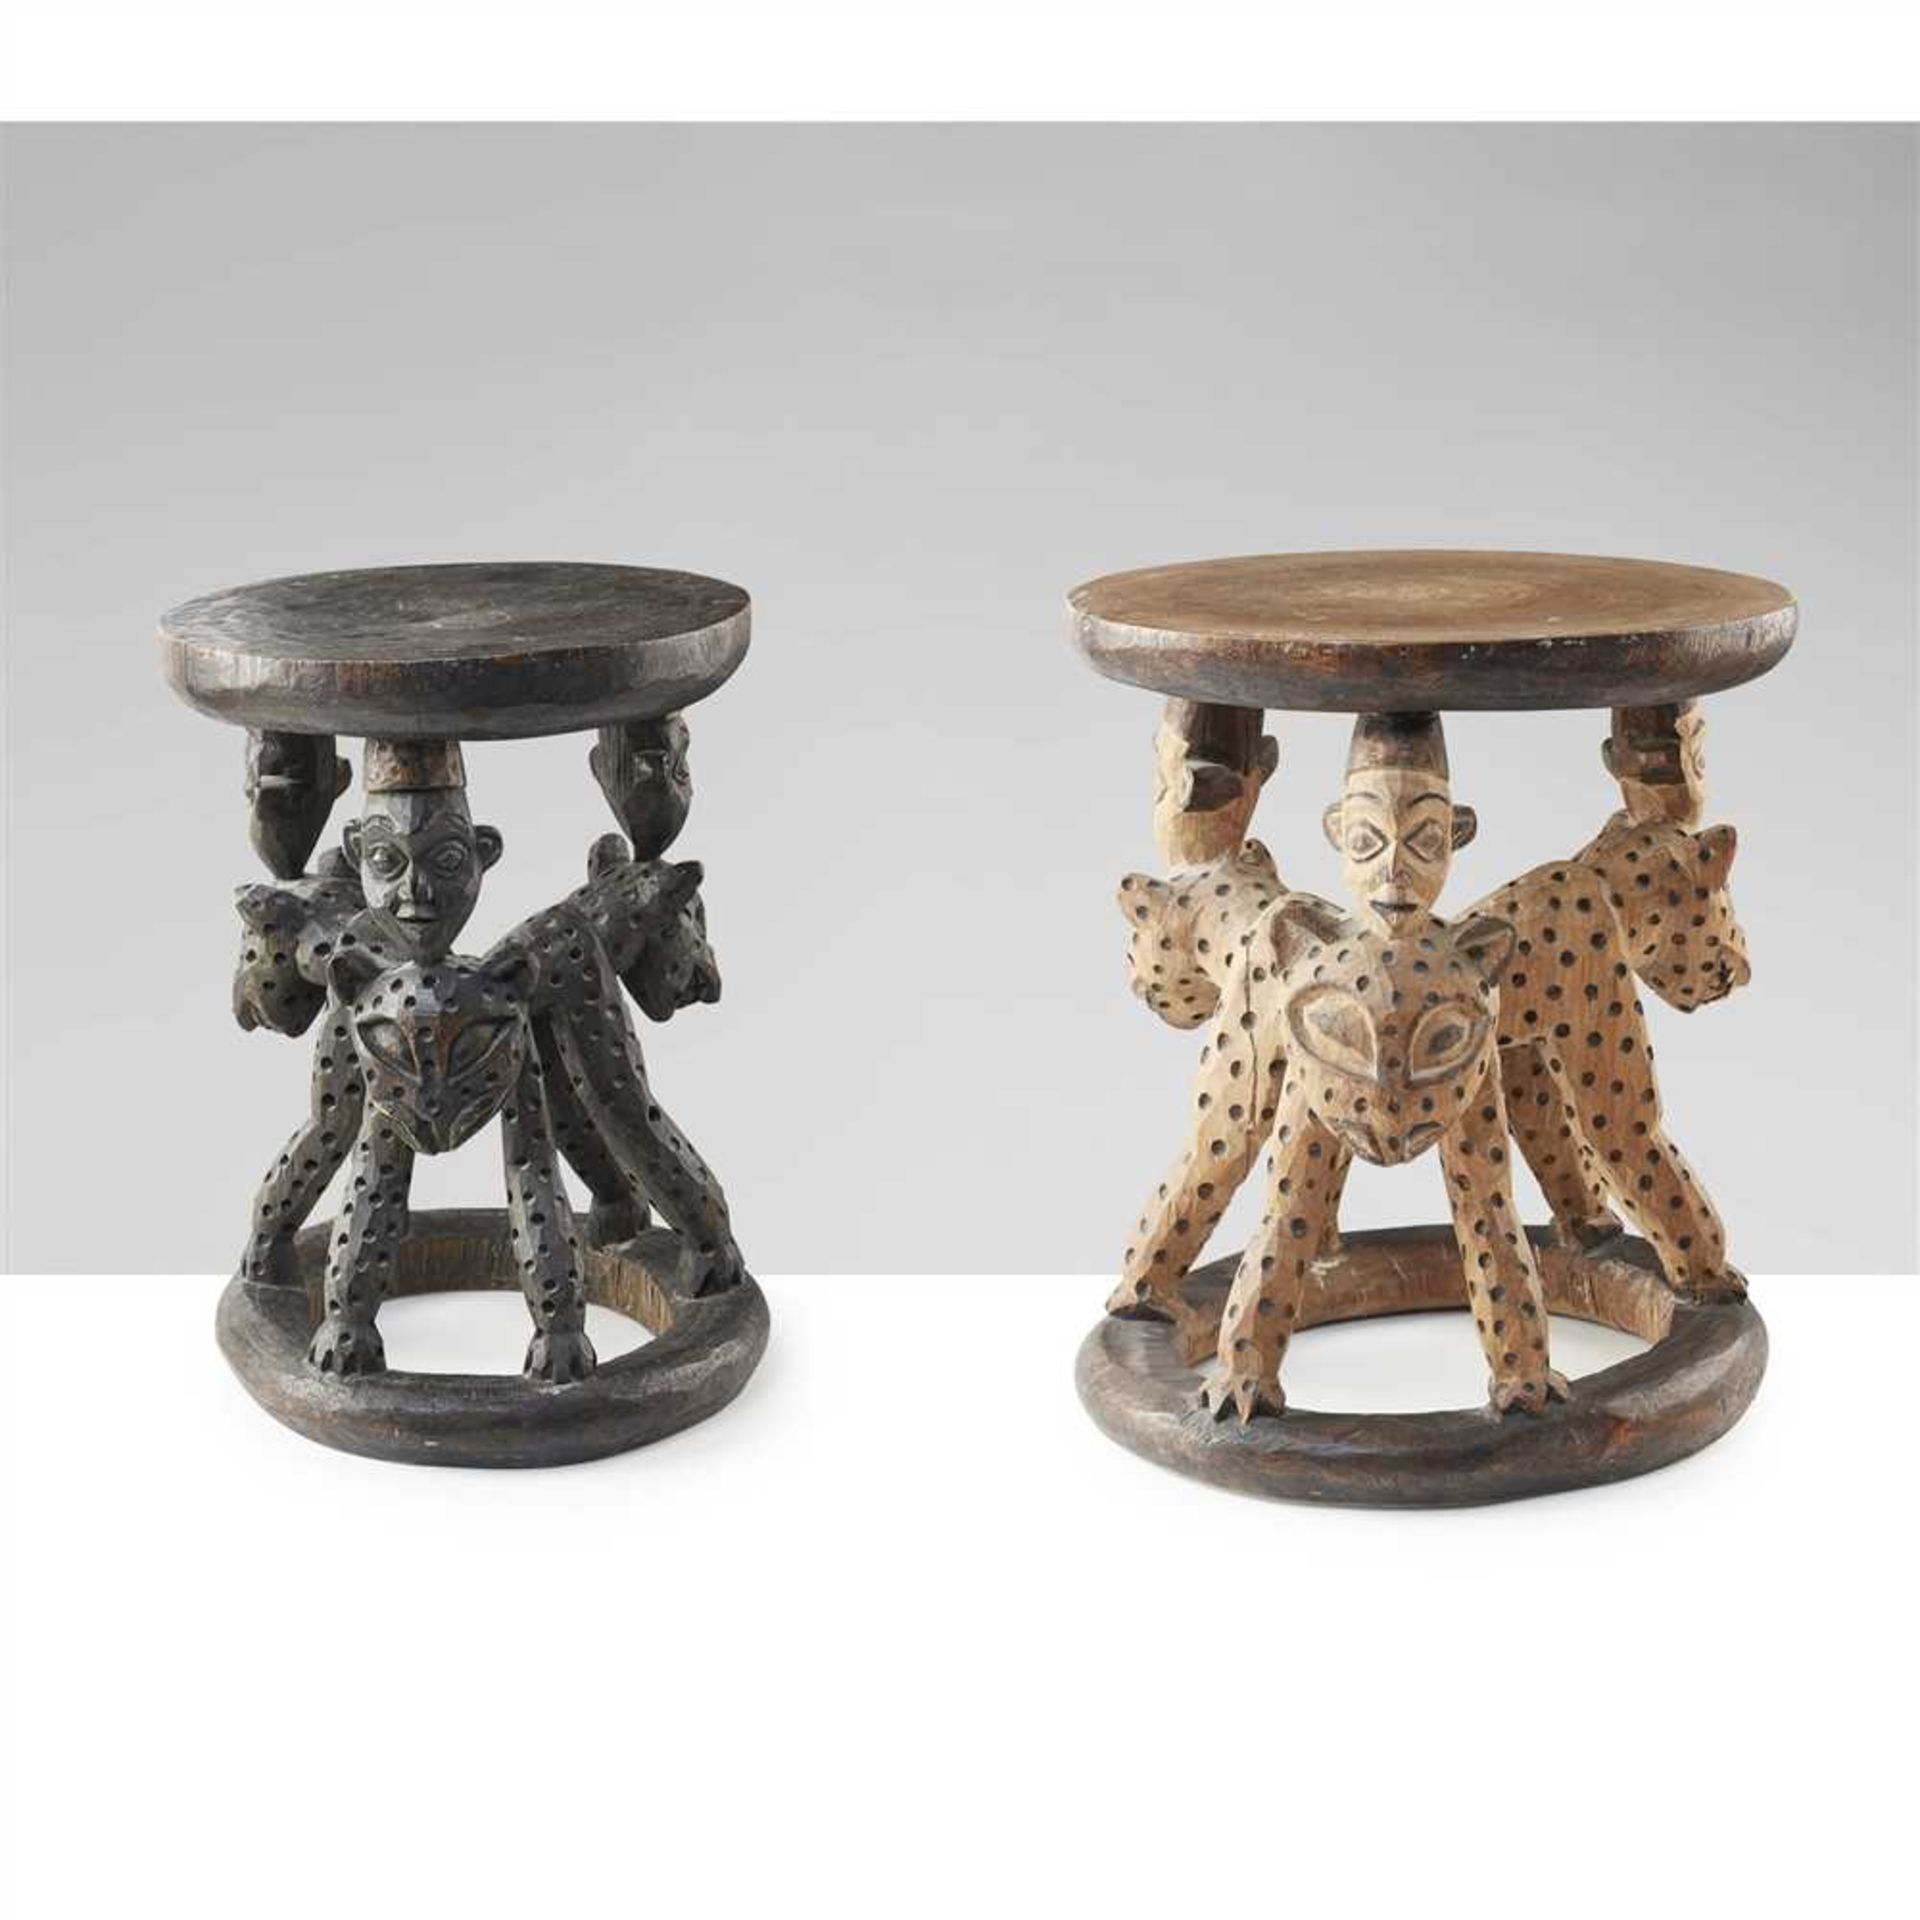 PAIR OF BAMILEKE STOOLS CAMEROON GRASSLANDS carved wood, both standing on ring bases with three